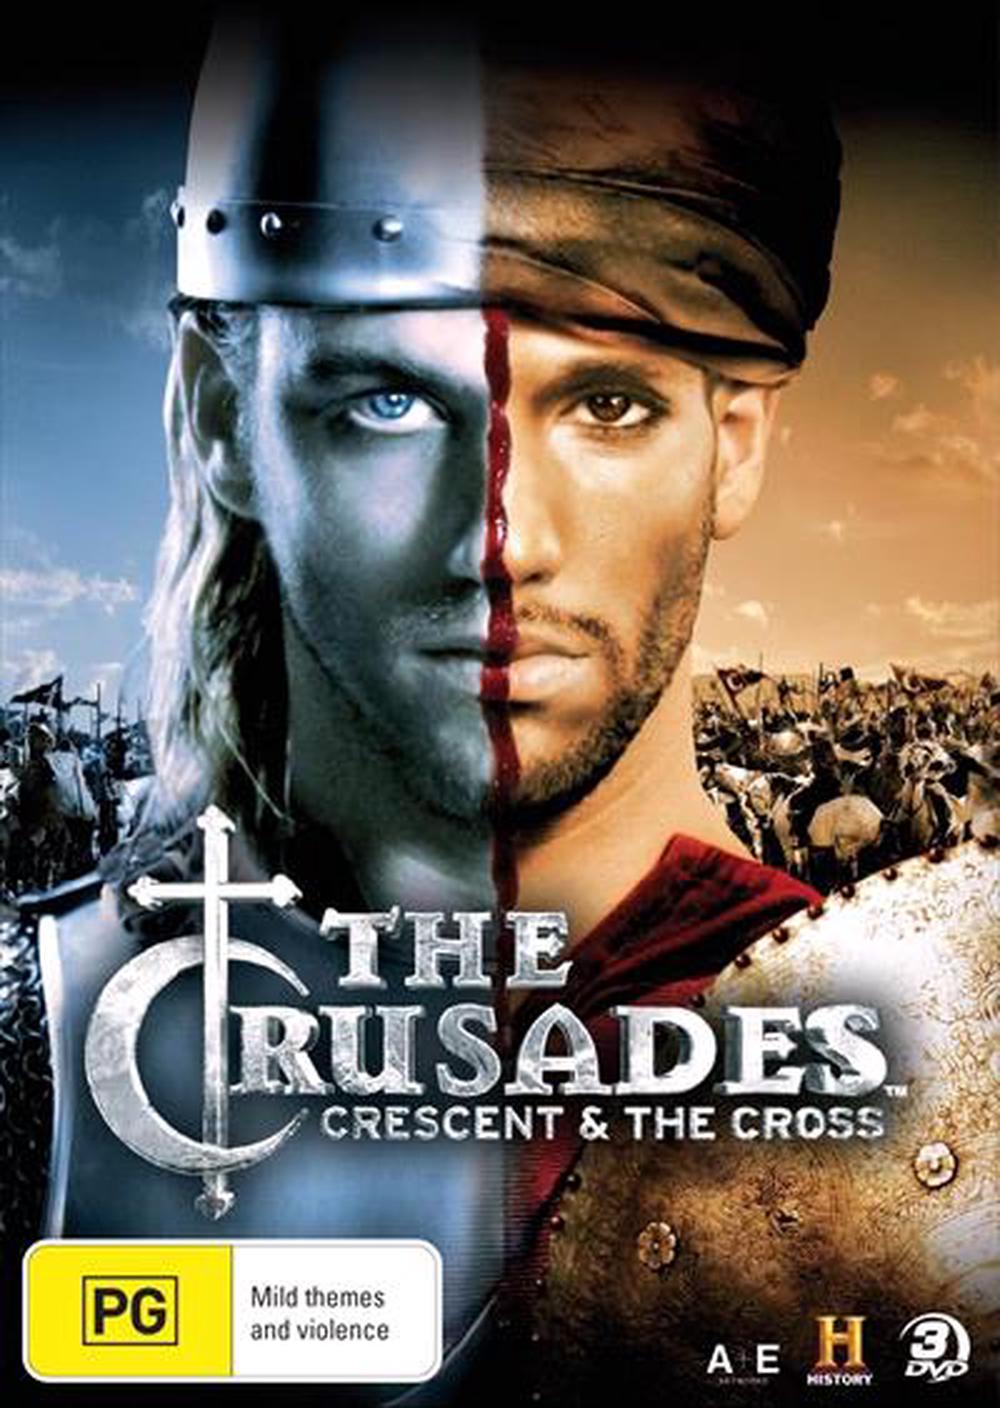 the-crusades-crescent-and-the-cross-dvd-buy-online-at-the-nile